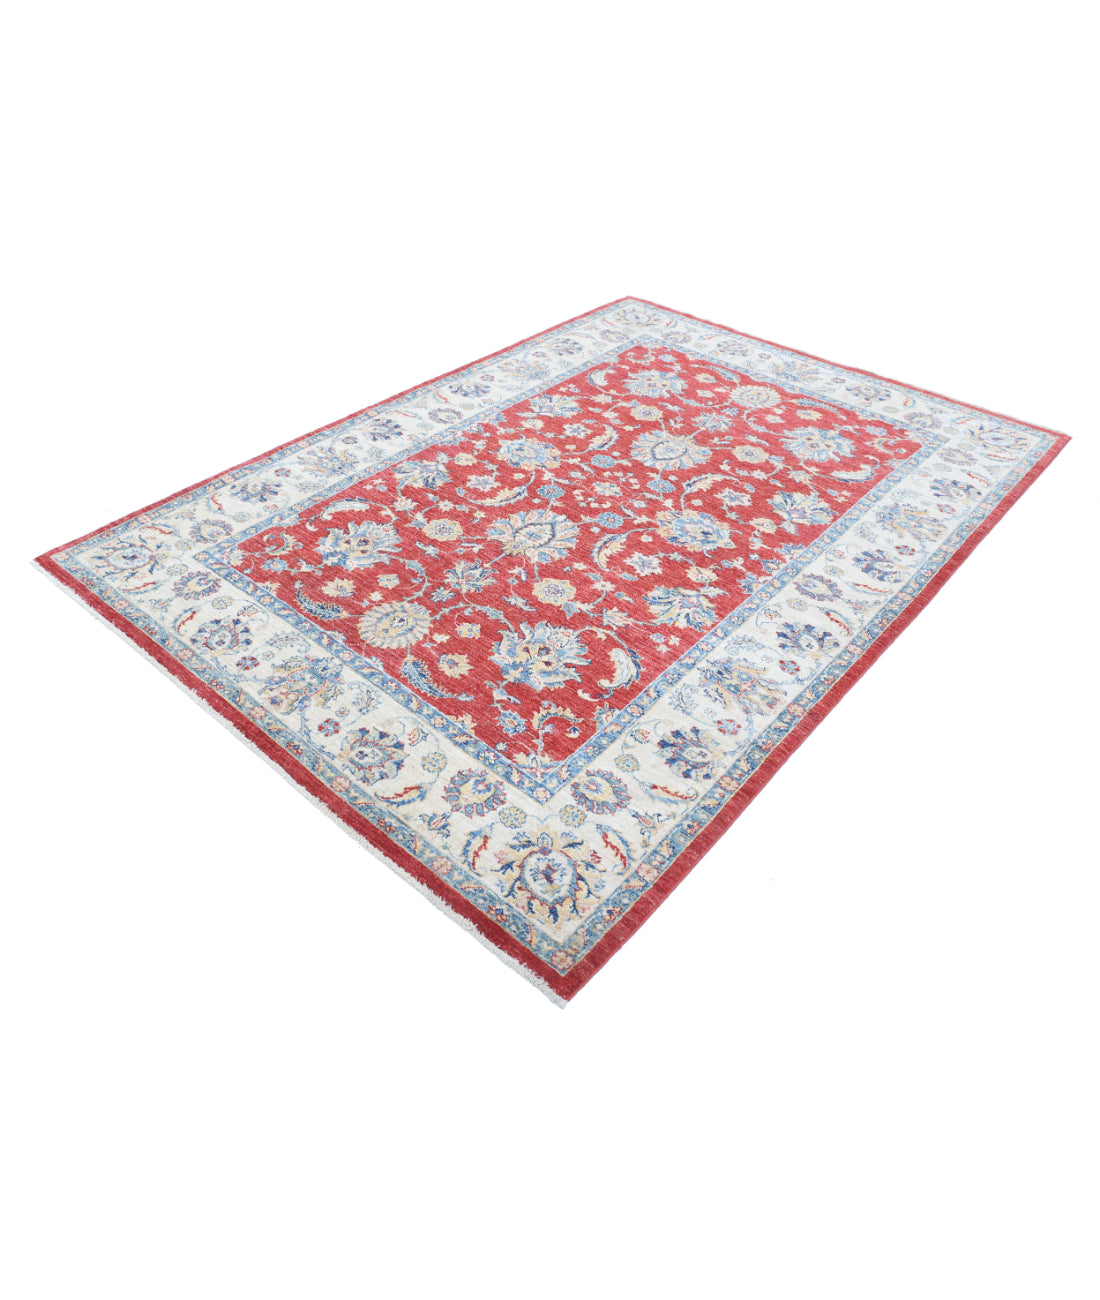 Hand Knotted Ziegler Farhan Wool Rug - 5'7'' x 7'11'' 5'7'' x 7'11'' (168 X 238) / Red / Ivory